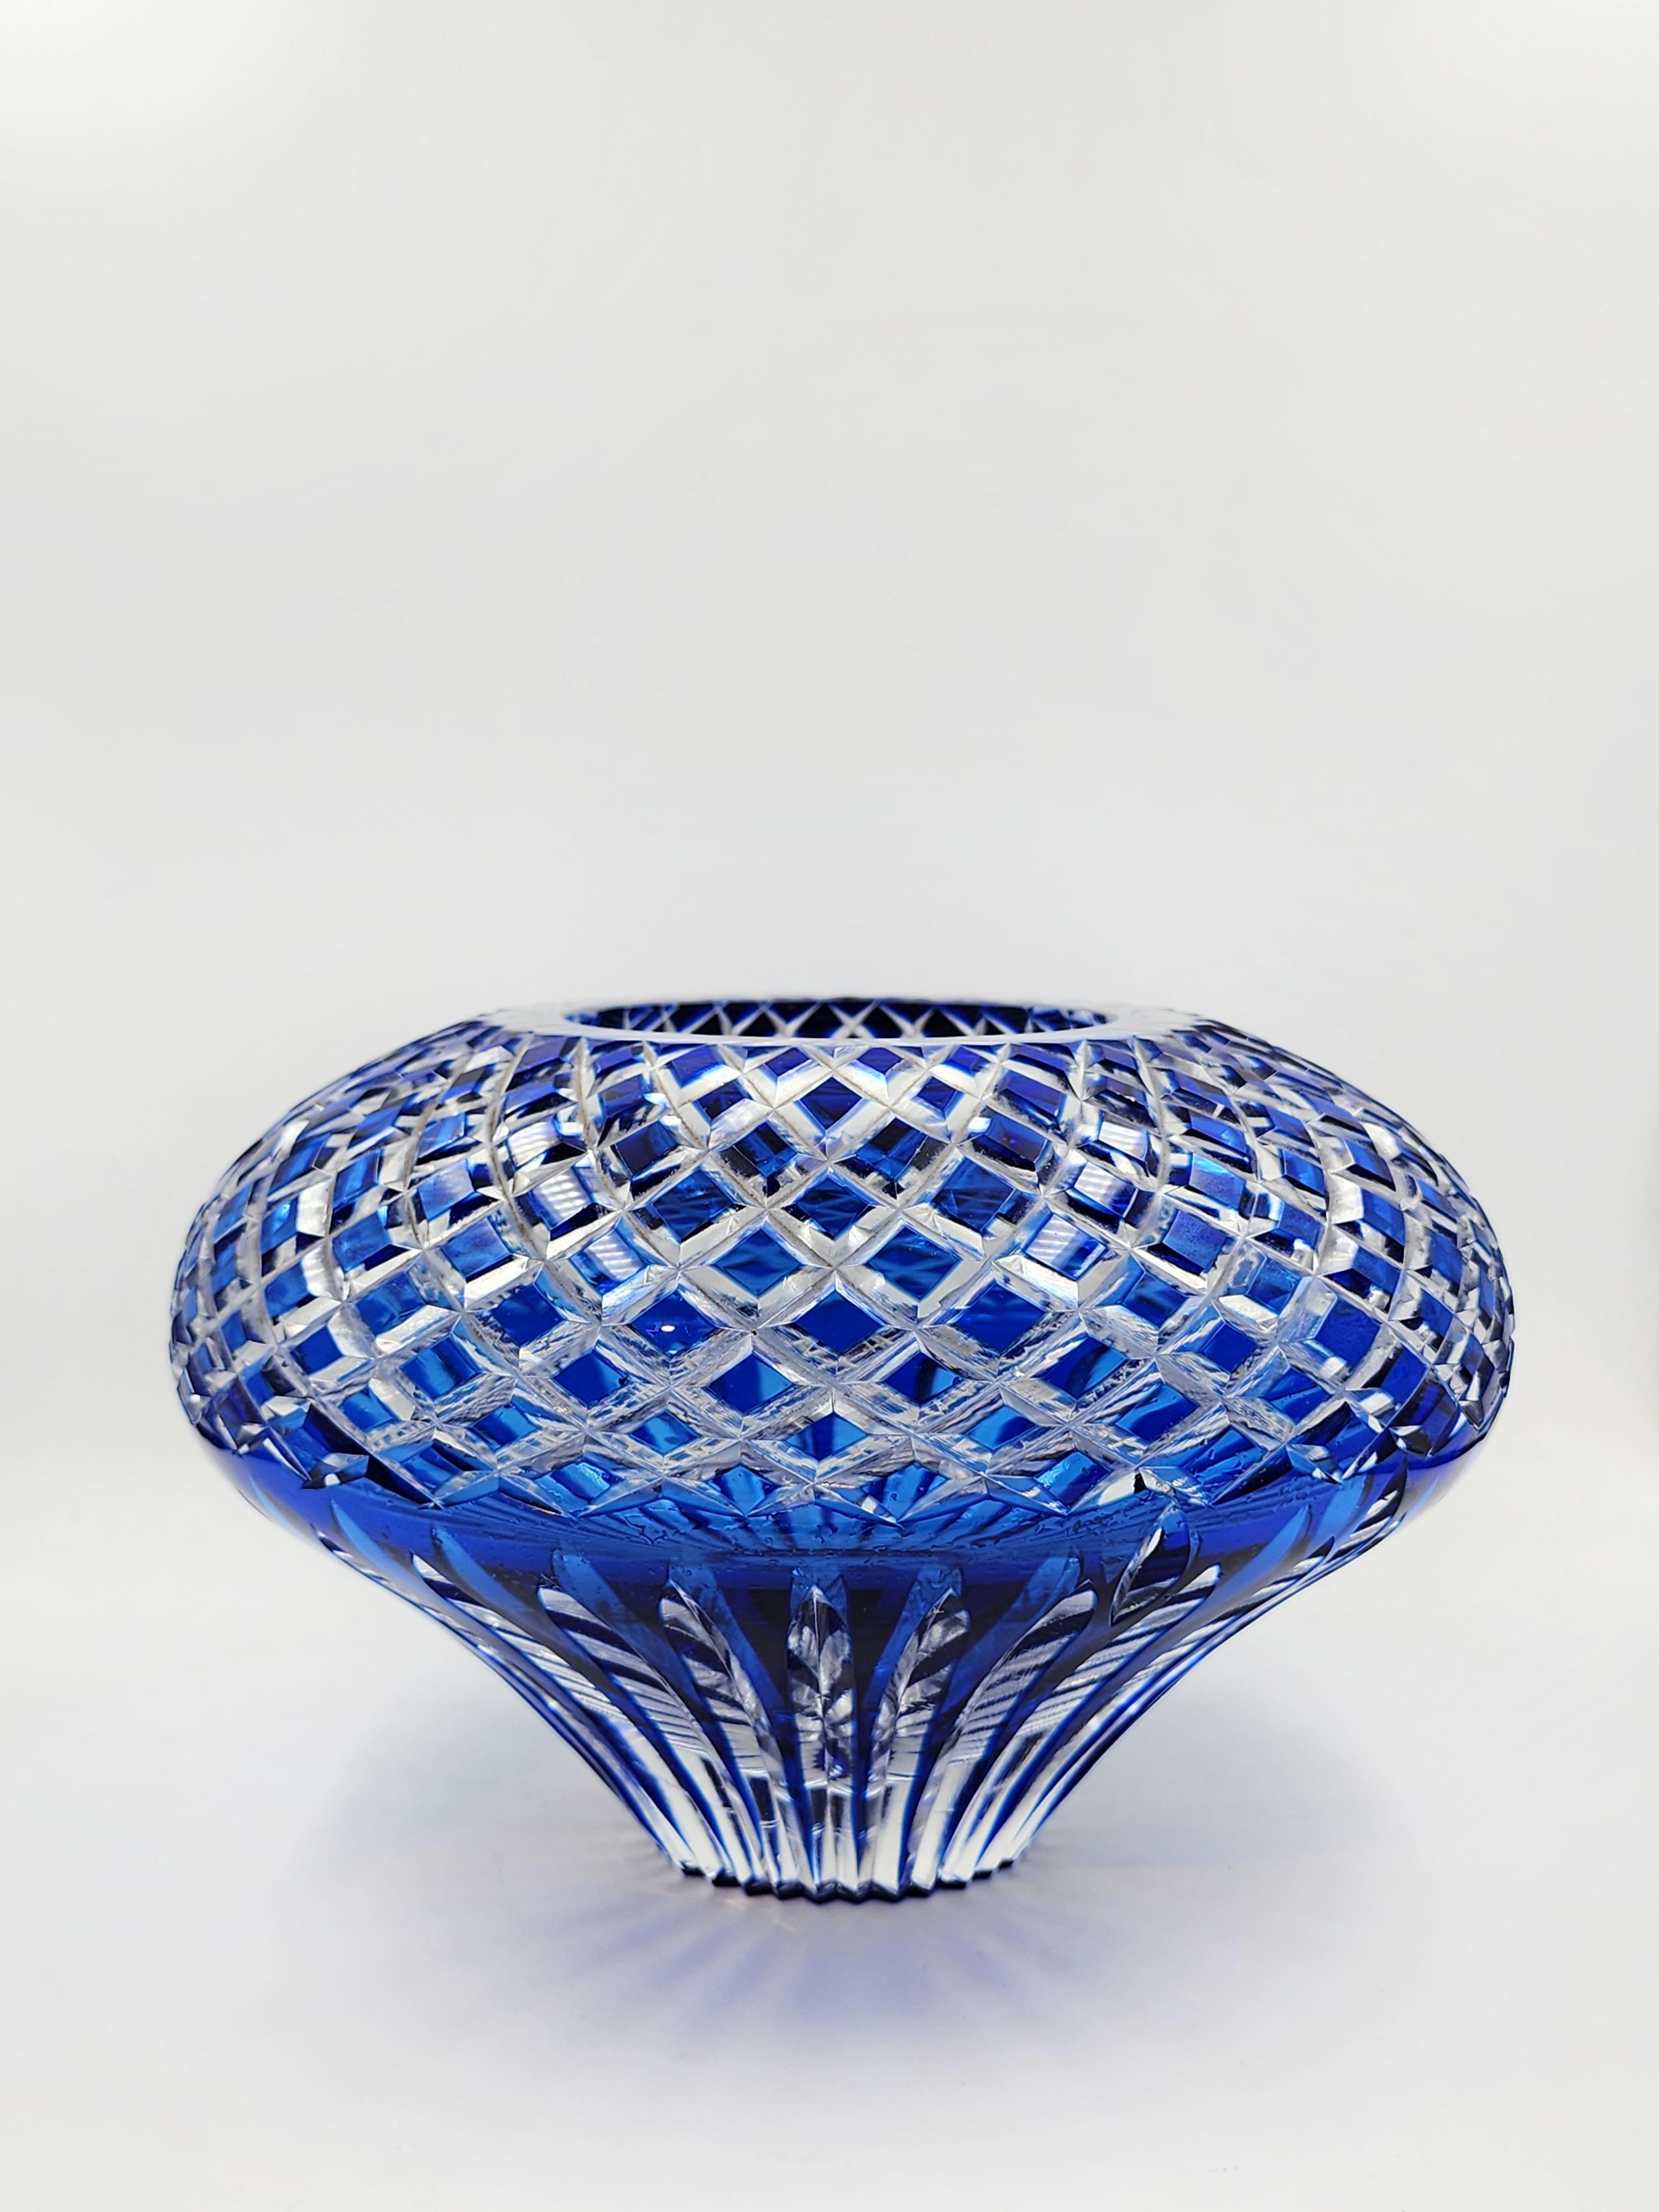 Val Saint Lambert Cut Crystal Vase, 20th Century
Beautiful cobalt blue cut glass vase, with an interlocking design, with a wide shape at the top that narrows towards the base.
It is a visually attractive piece, even more so when it is reflected with